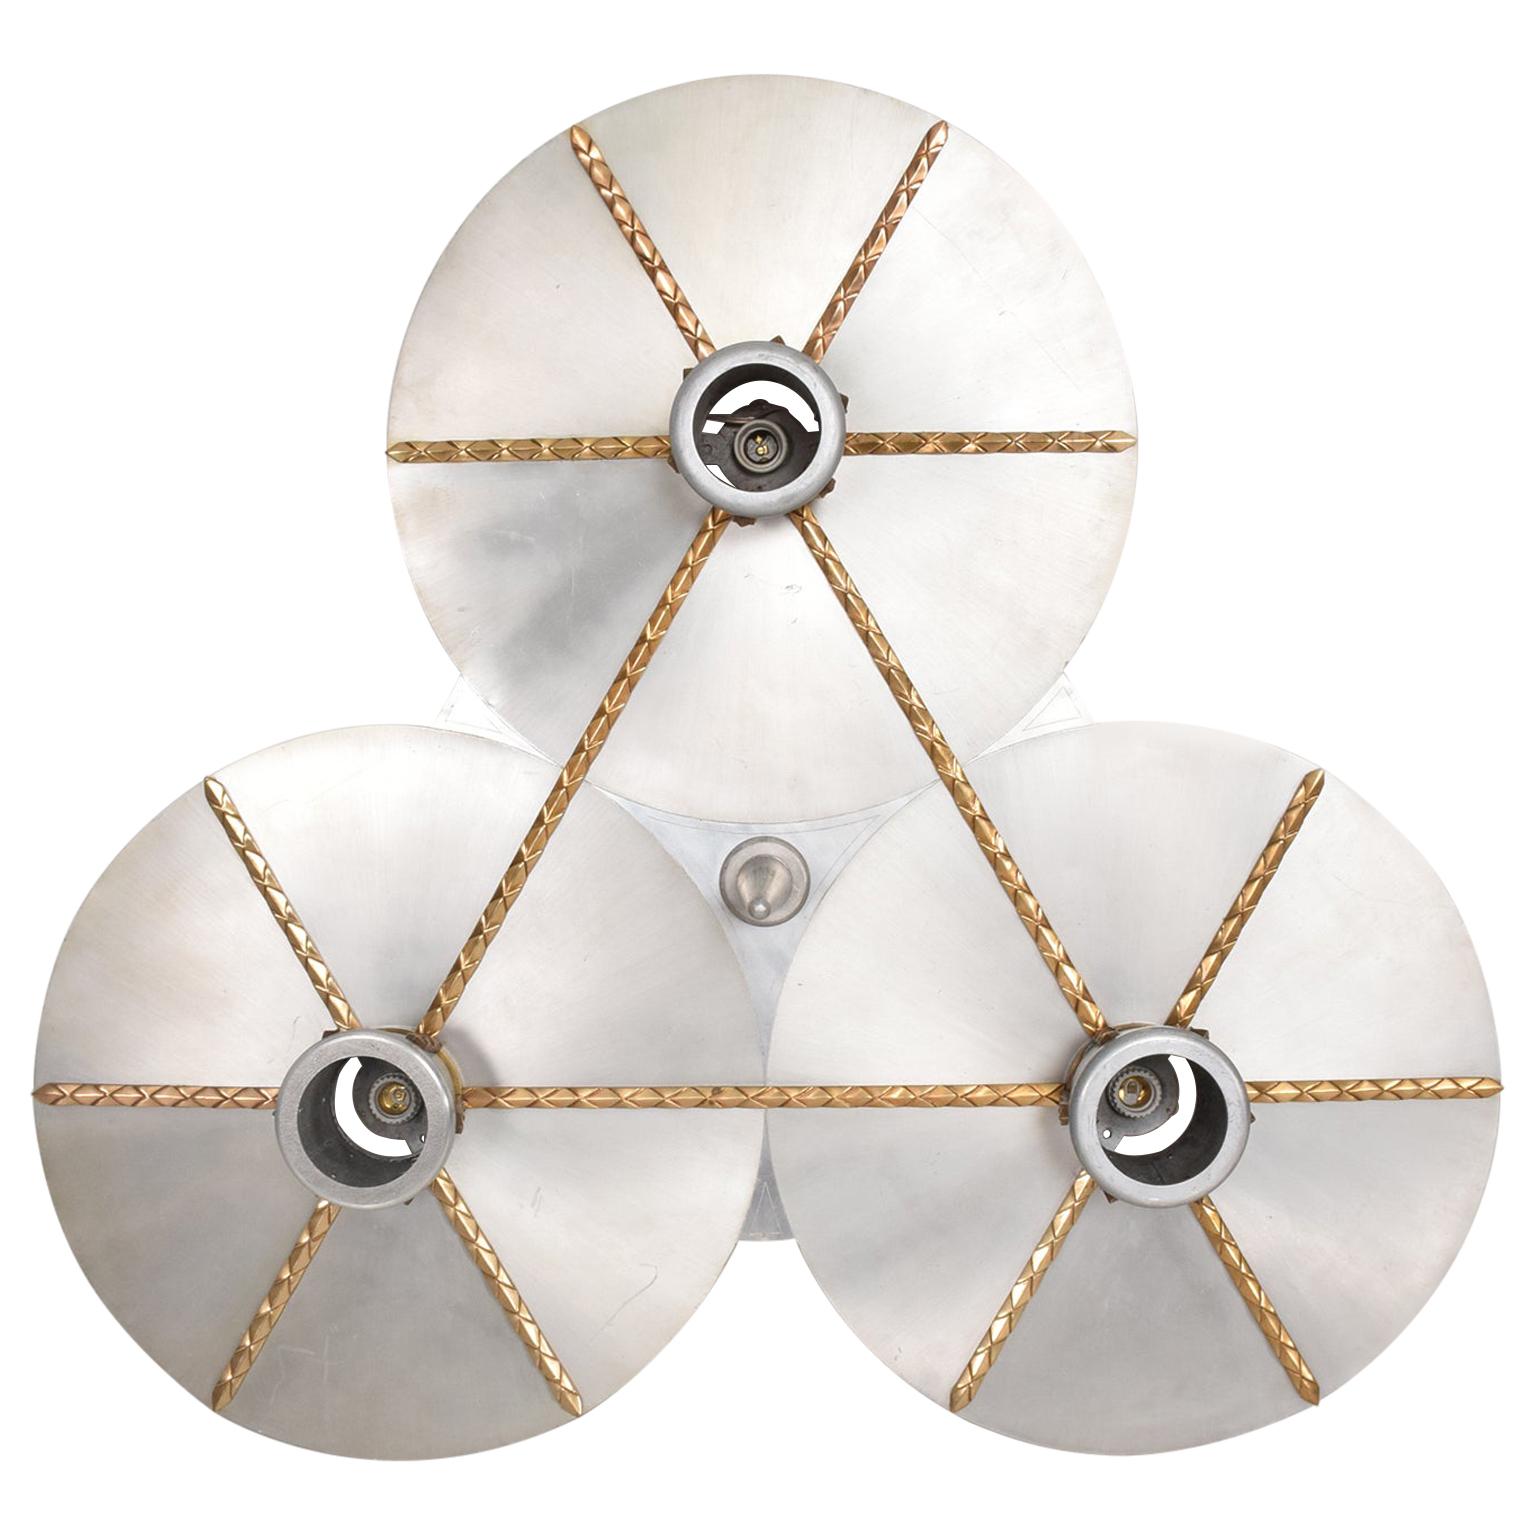 spectacular Mexican Art Deco Chandelier 1960s
round three-light Trinity Circular Cluster Ceiling lamp
Light fixture Plafonnier
aluminum with bronze accents
Fixture requires six screws (not included) for mounting
50 in diameter x 11 in